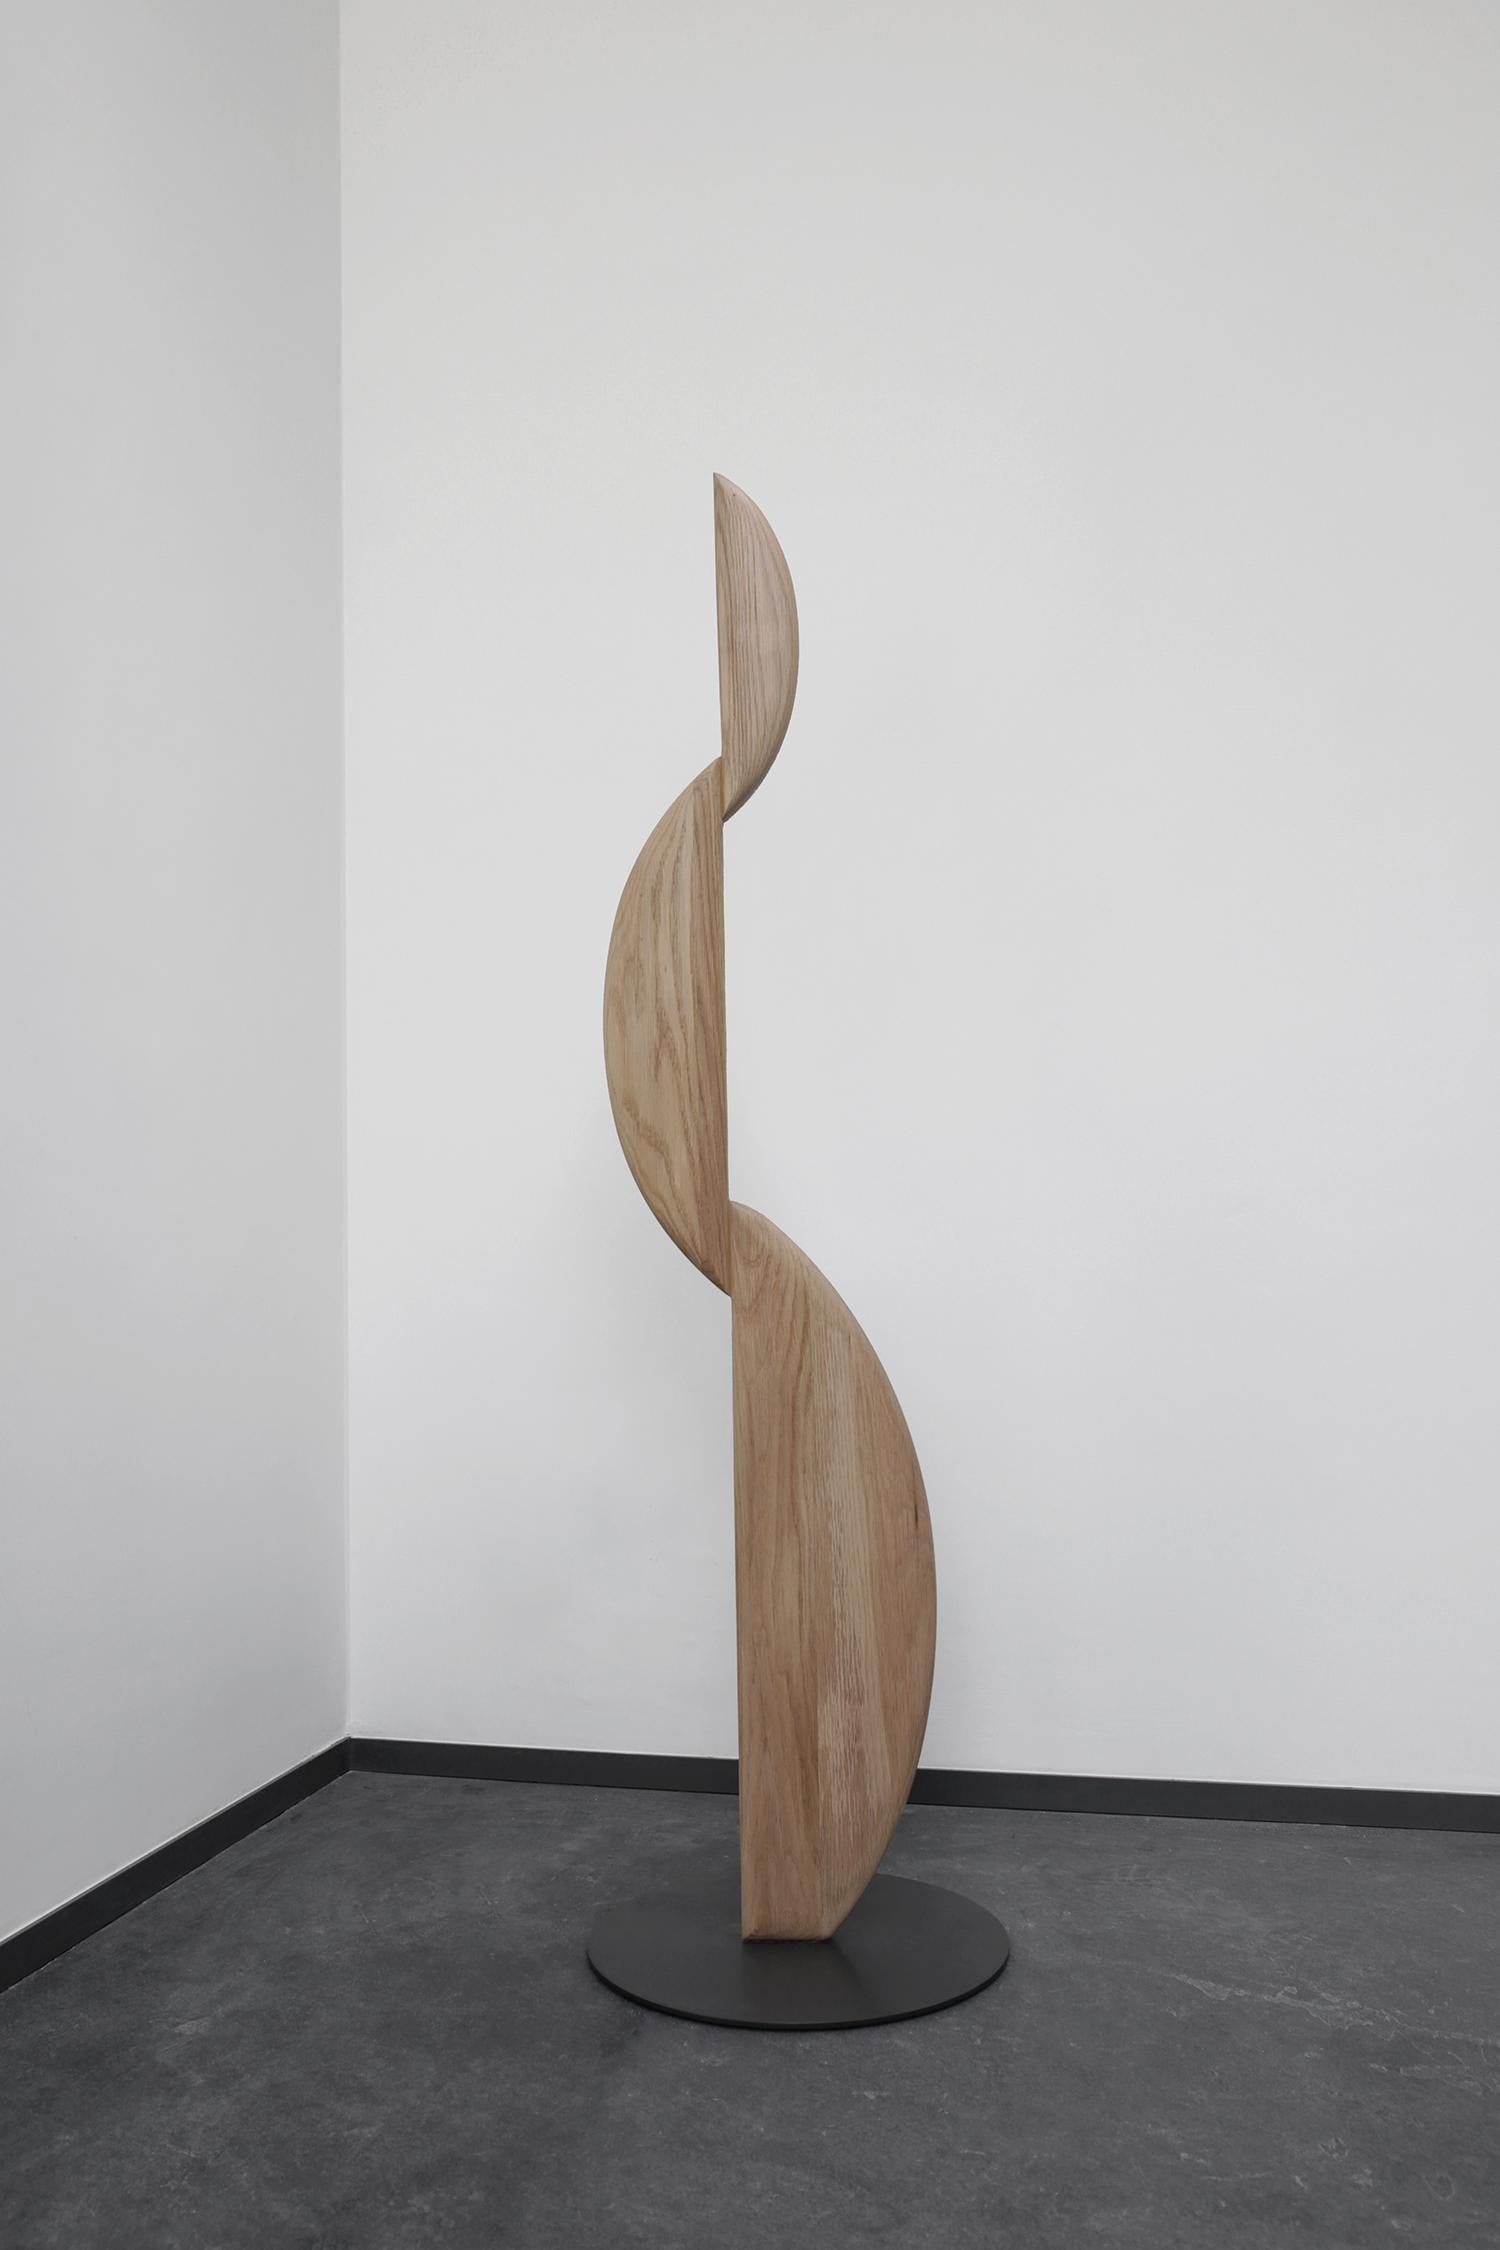 III Tercera sculpture by Joel Escalona
Dimensions: D 45 x W 45 x H 160 cm
Materials: oak wood, metal.
Also available in burnt finish.

Sculpture made of white oak or natural white oak with burnt finish option and metal base.

Joel